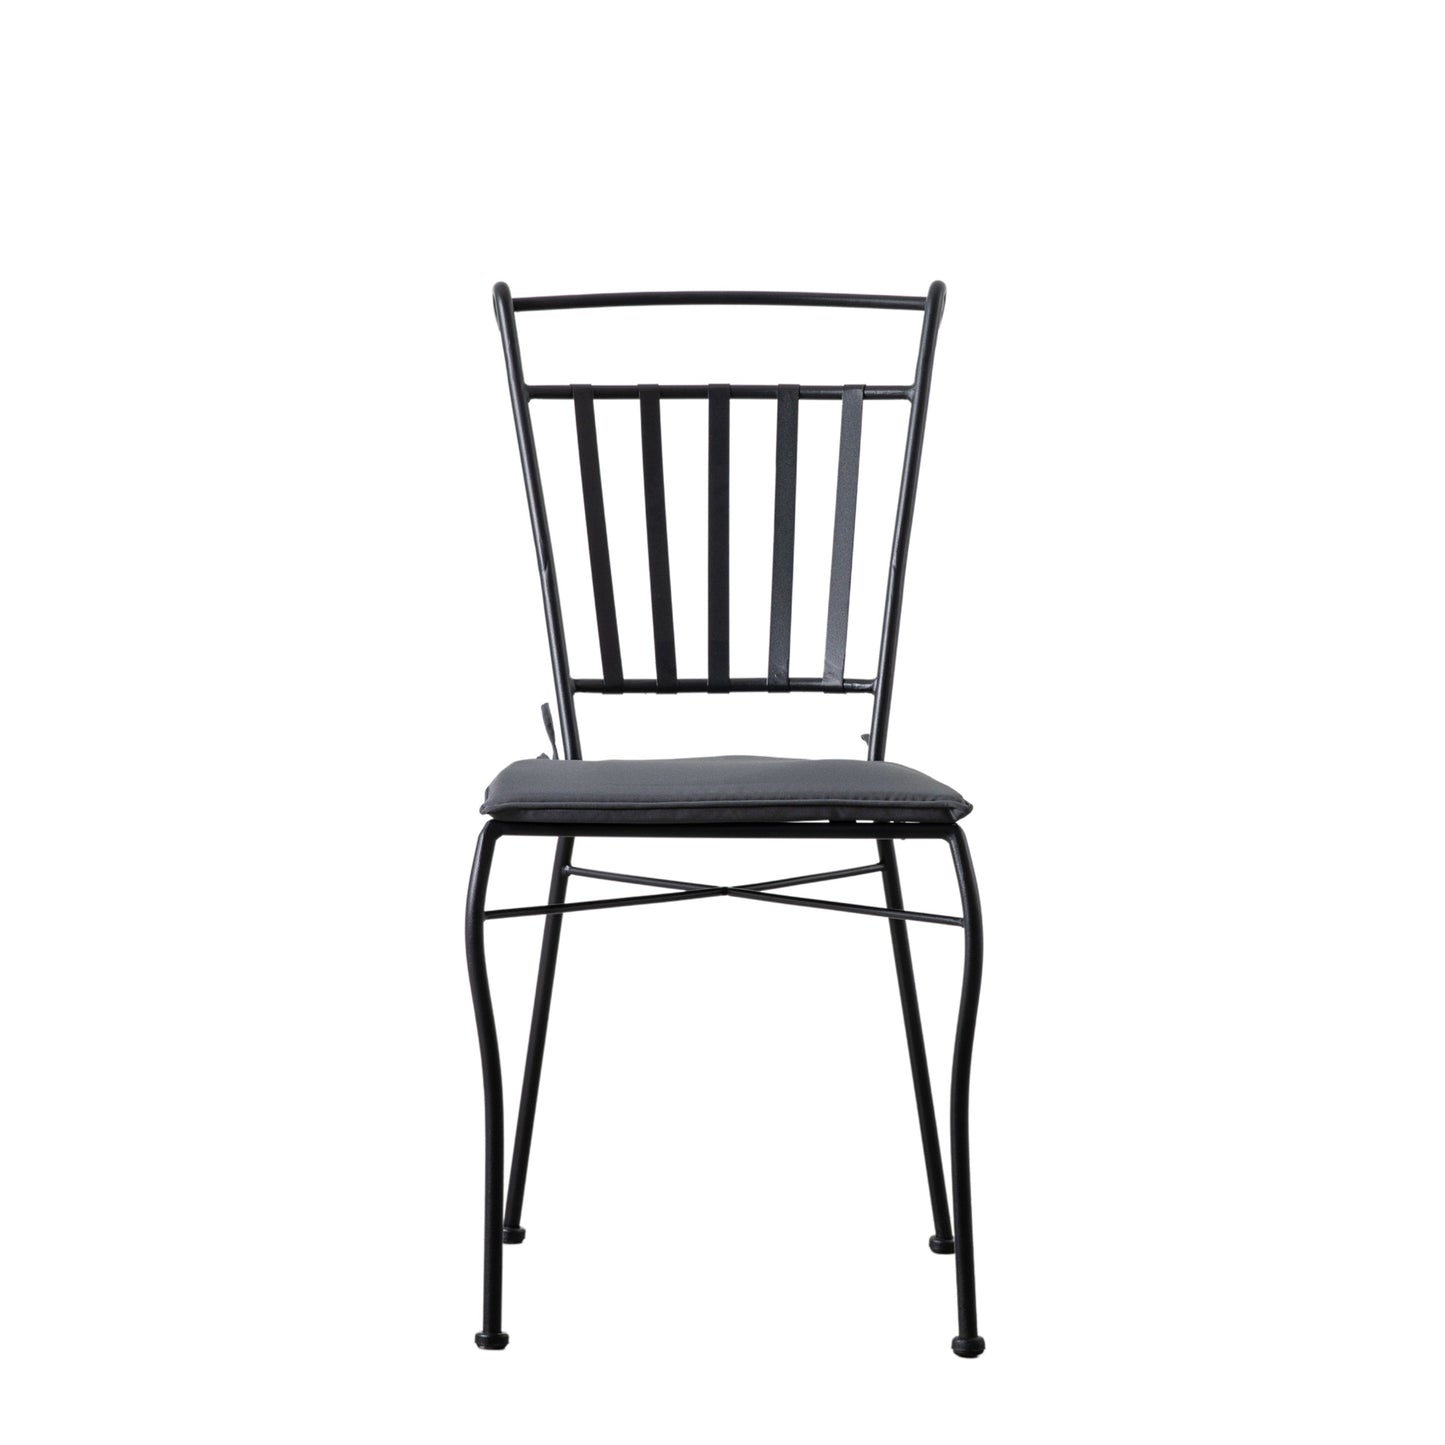 A Colyton Dining Chair for interior decor by Kikiathome.co.uk against a white background.